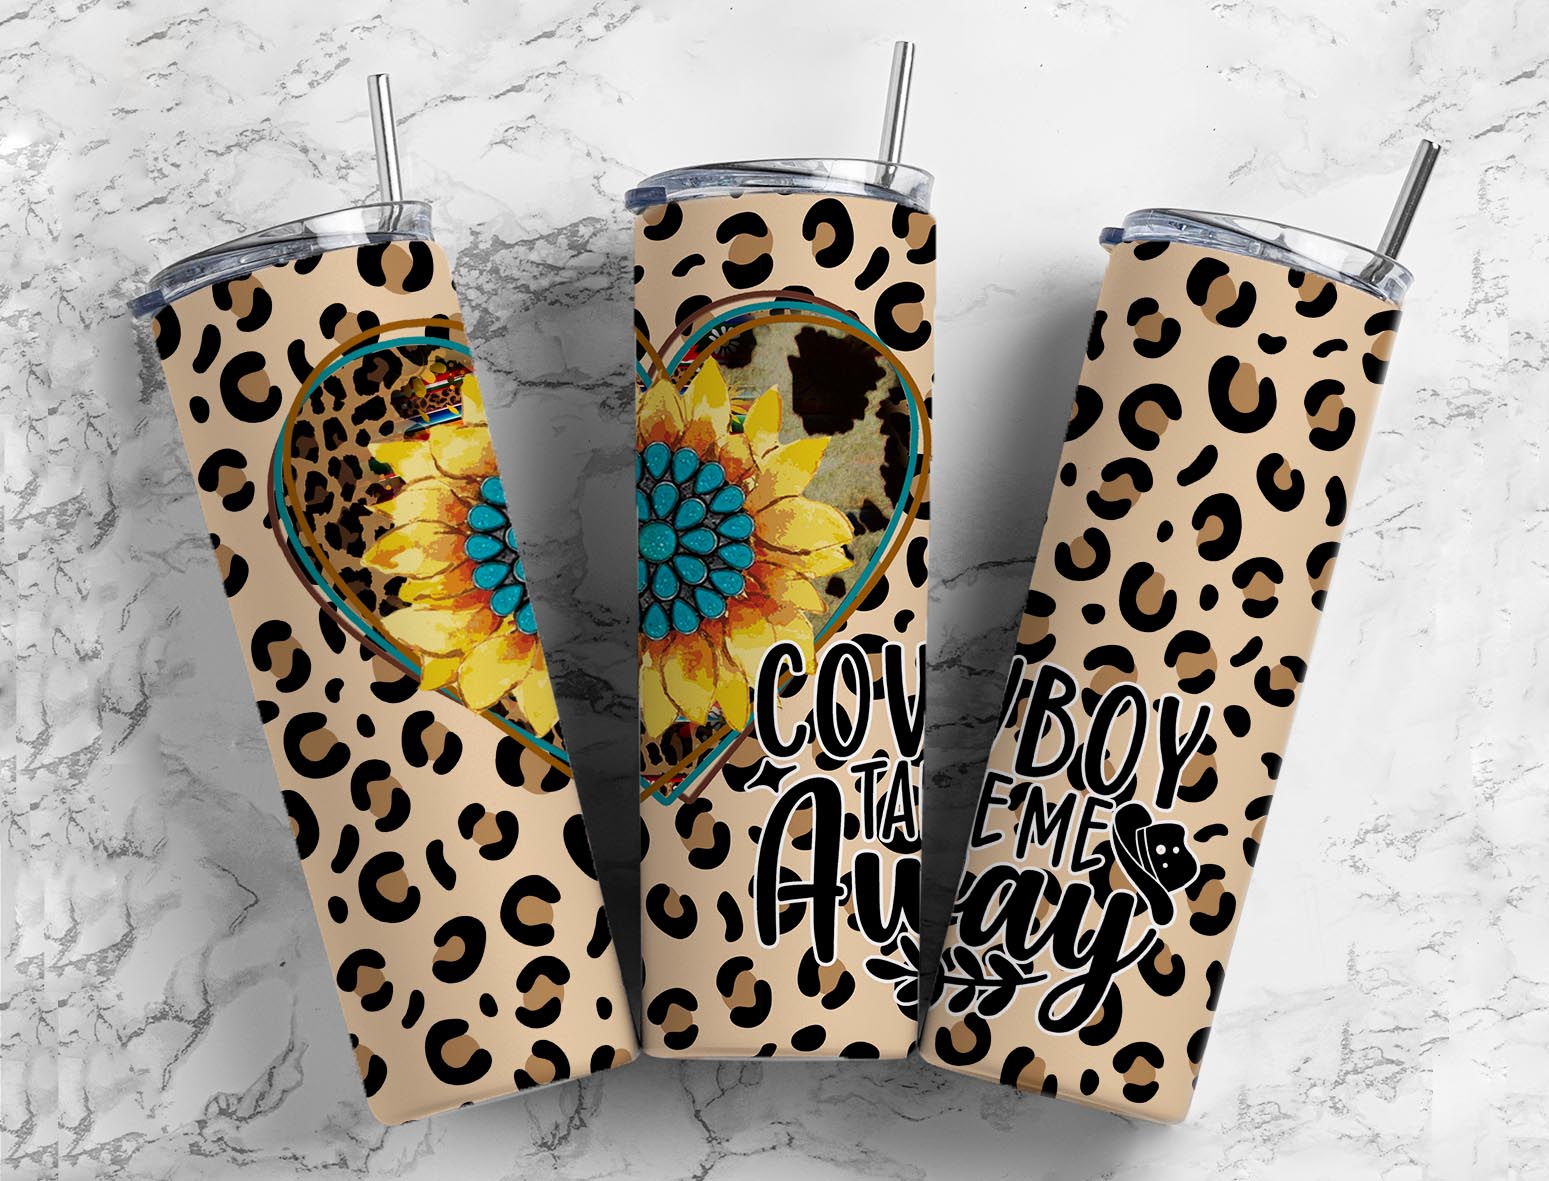 Leopard Tumbler, Leopard Print Skinny Tumbler with Lid and Straw